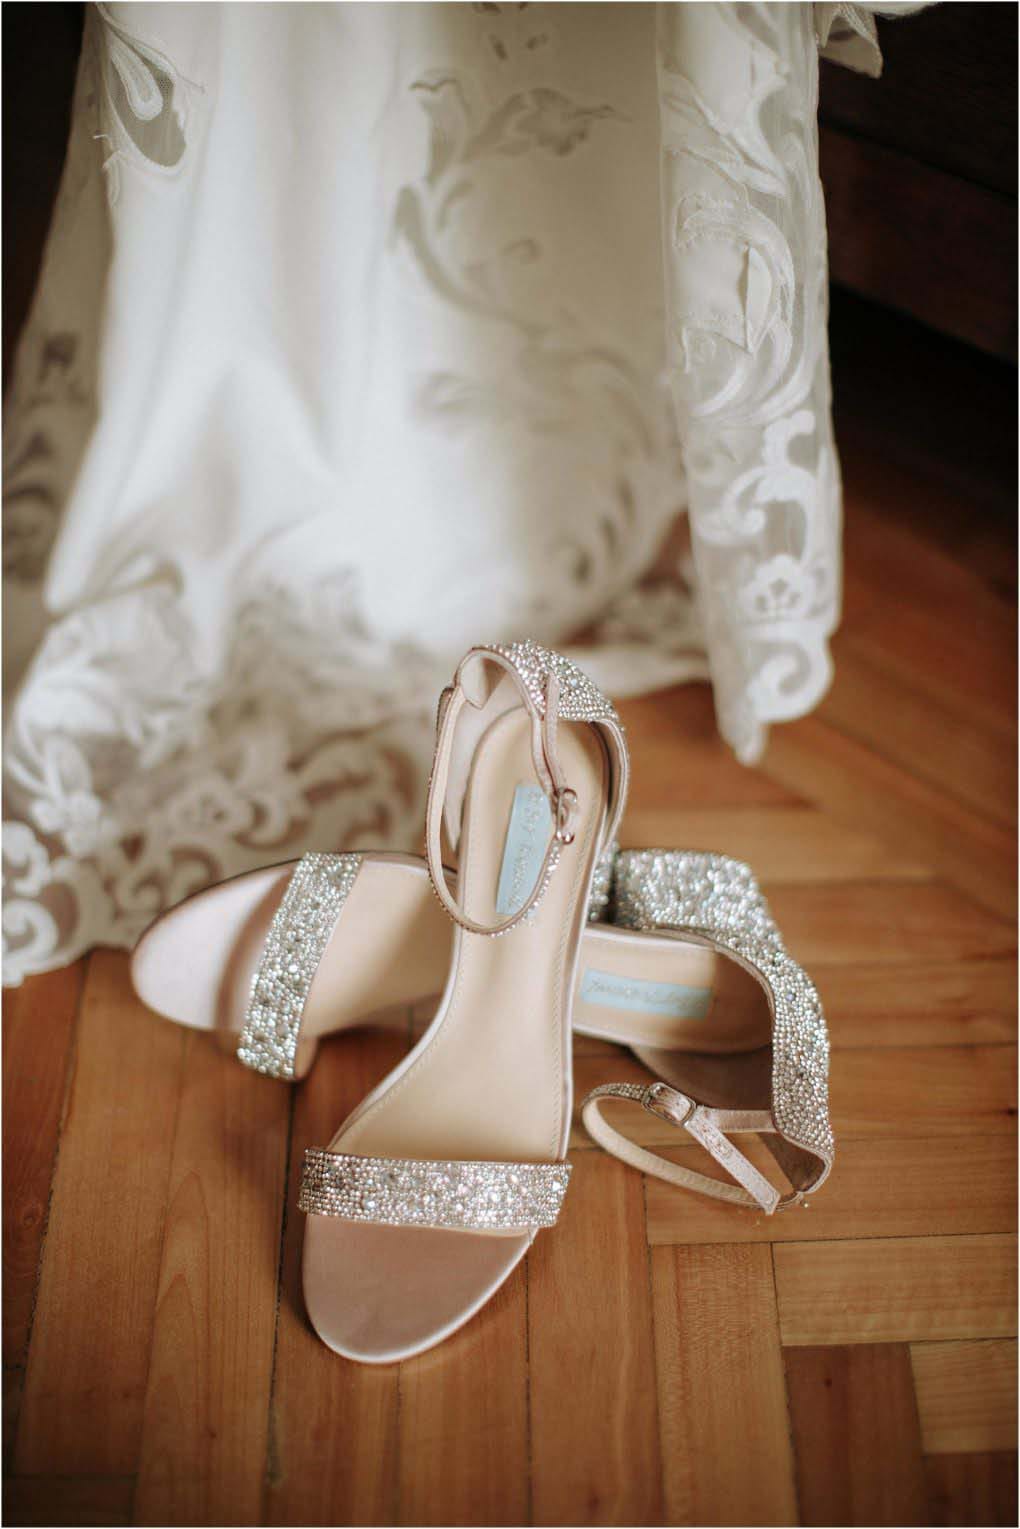 The brides lace gown hangs with her crystal encrusted shoes below.